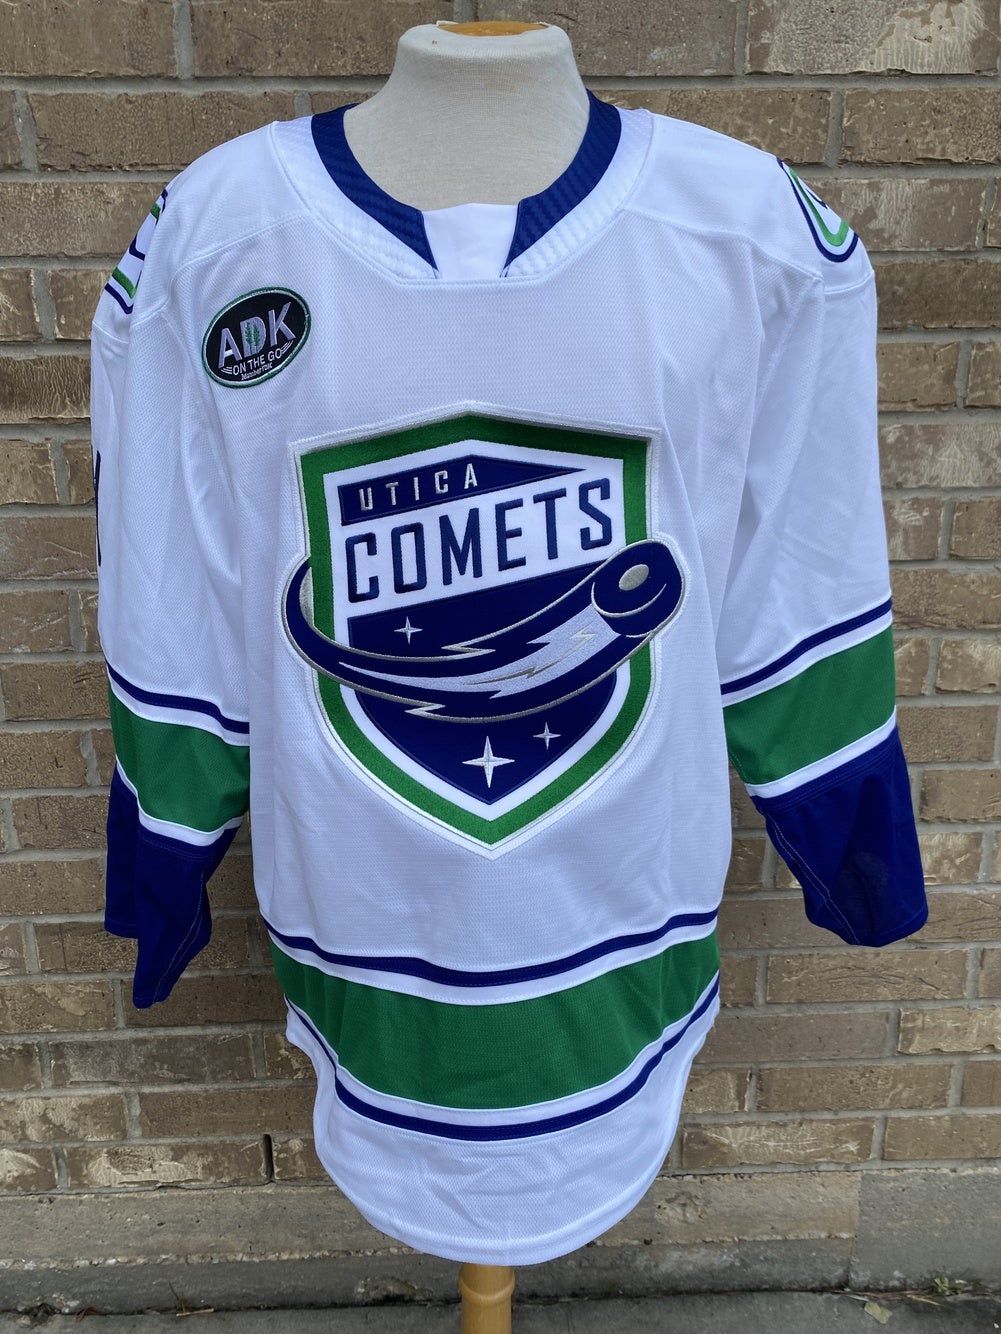 2021-22 Utica Comets Season Preview - All About The Jersey